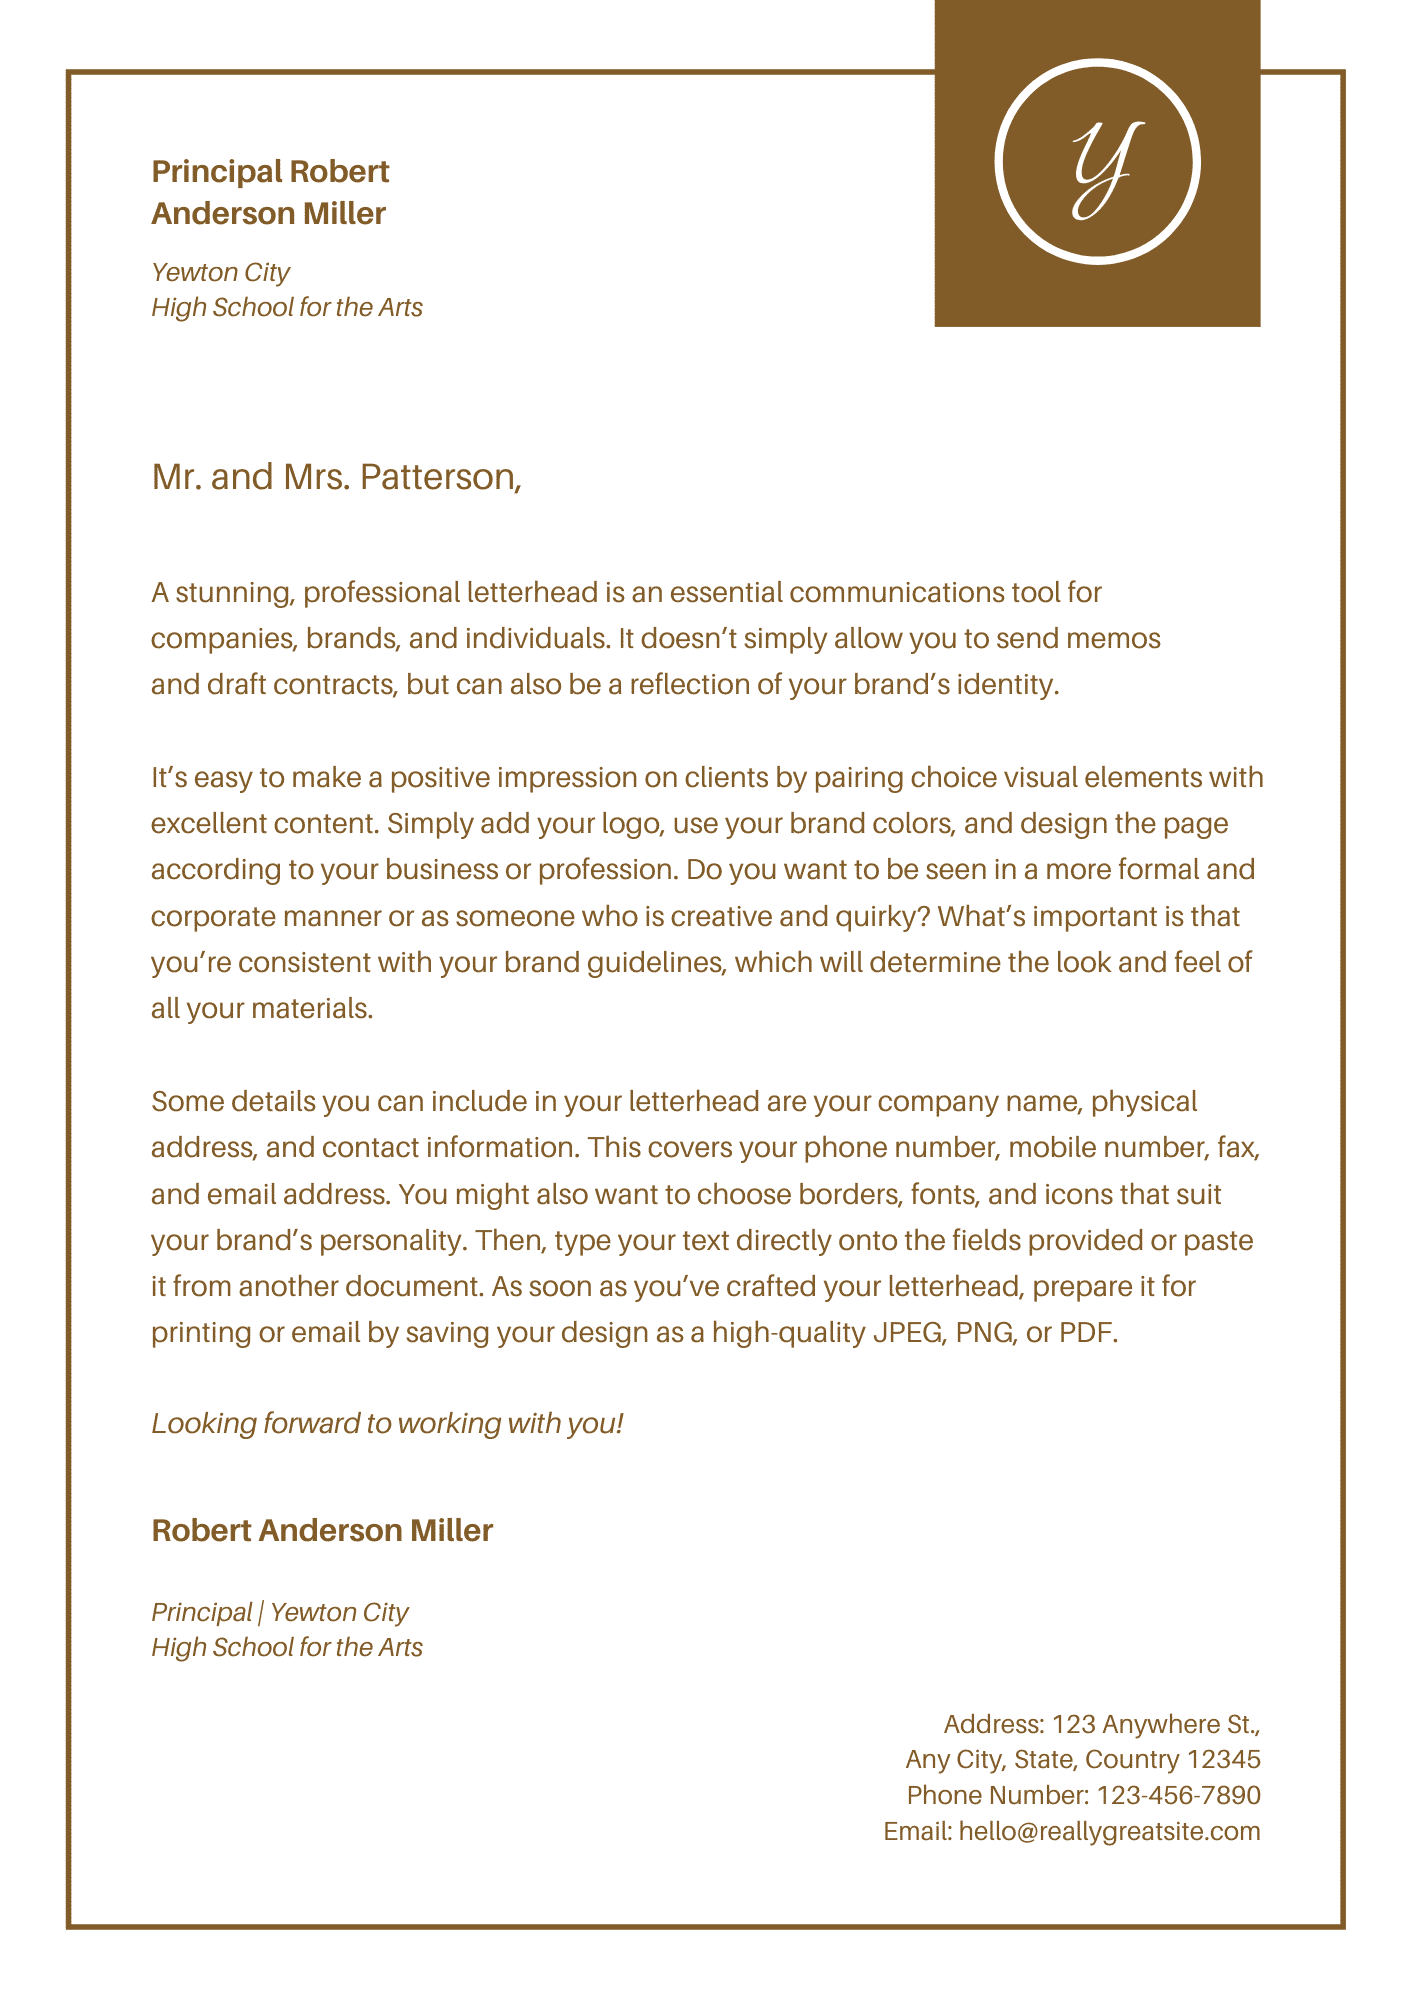 Request Letter For Experience Certificate